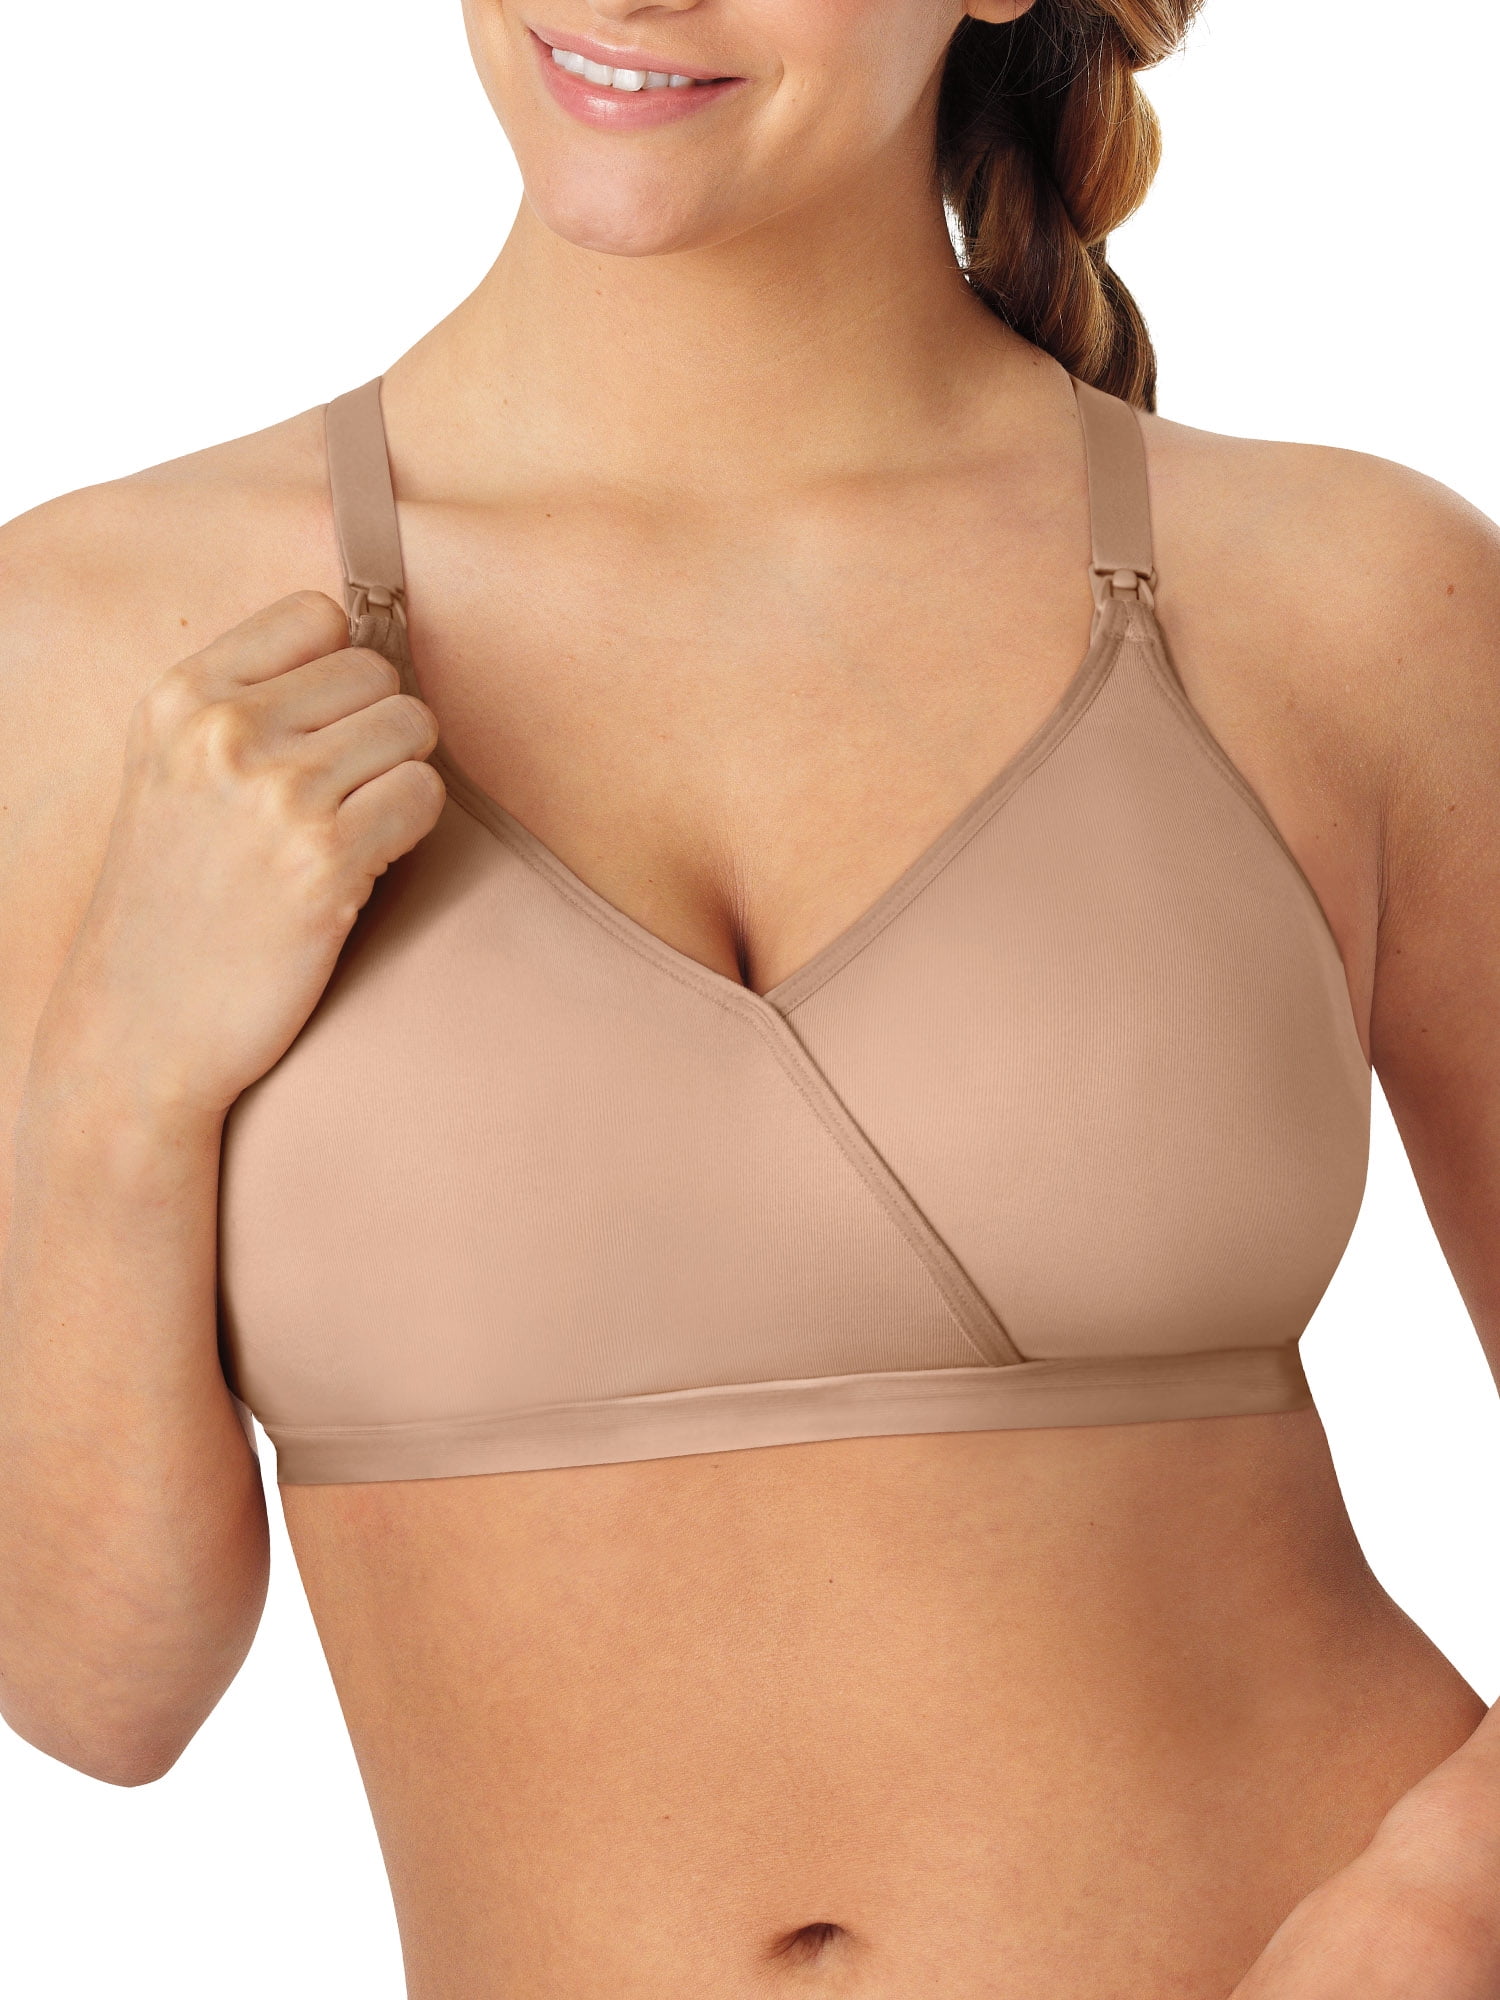 Playtex nursing bra 36 DD Size undefined - $24 New With Tags - From Adriana